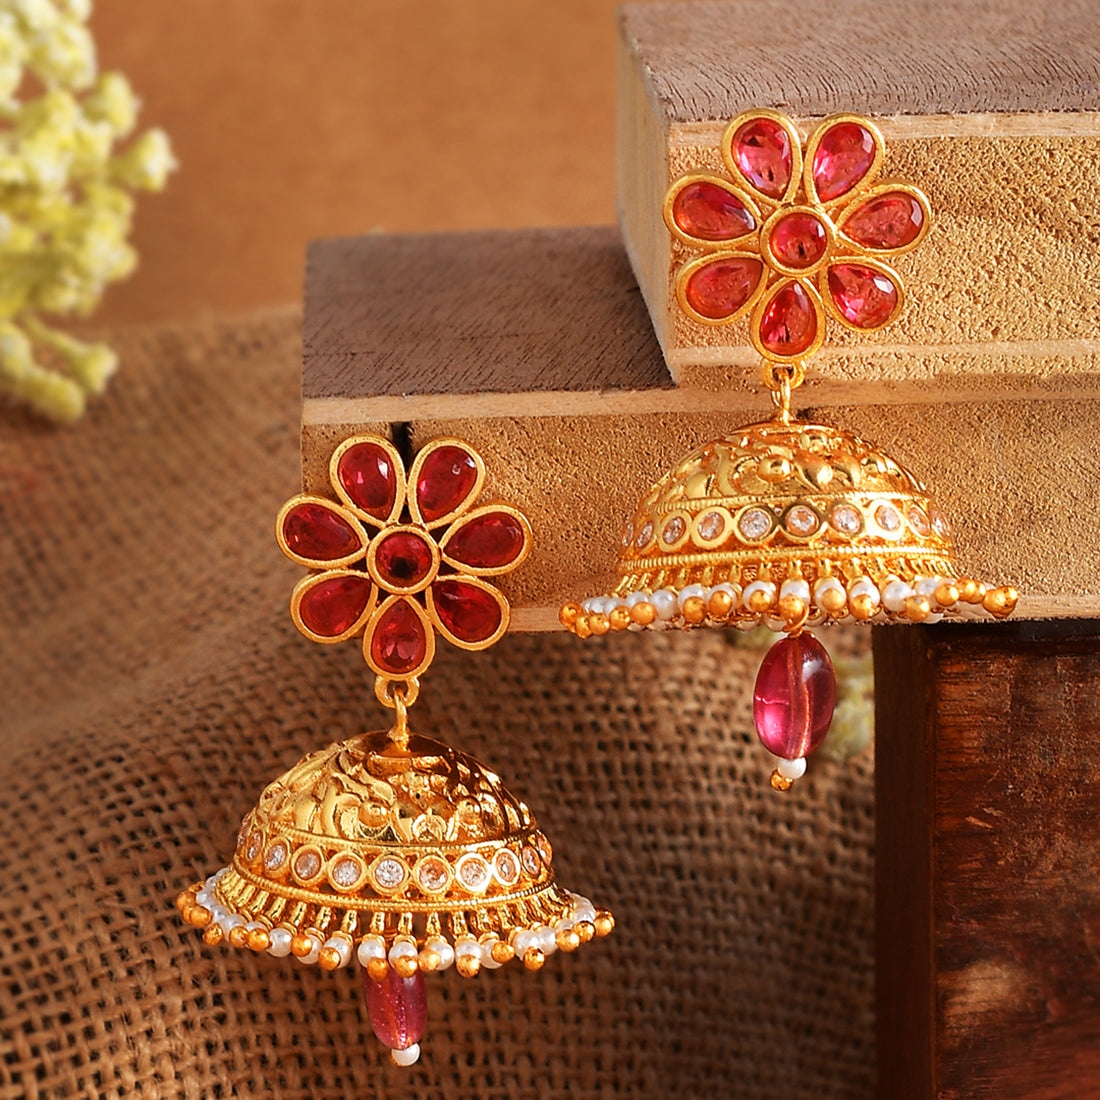 Women's Abharan Red Stones And Pearls Floral Jhumka Earrings - Voylla